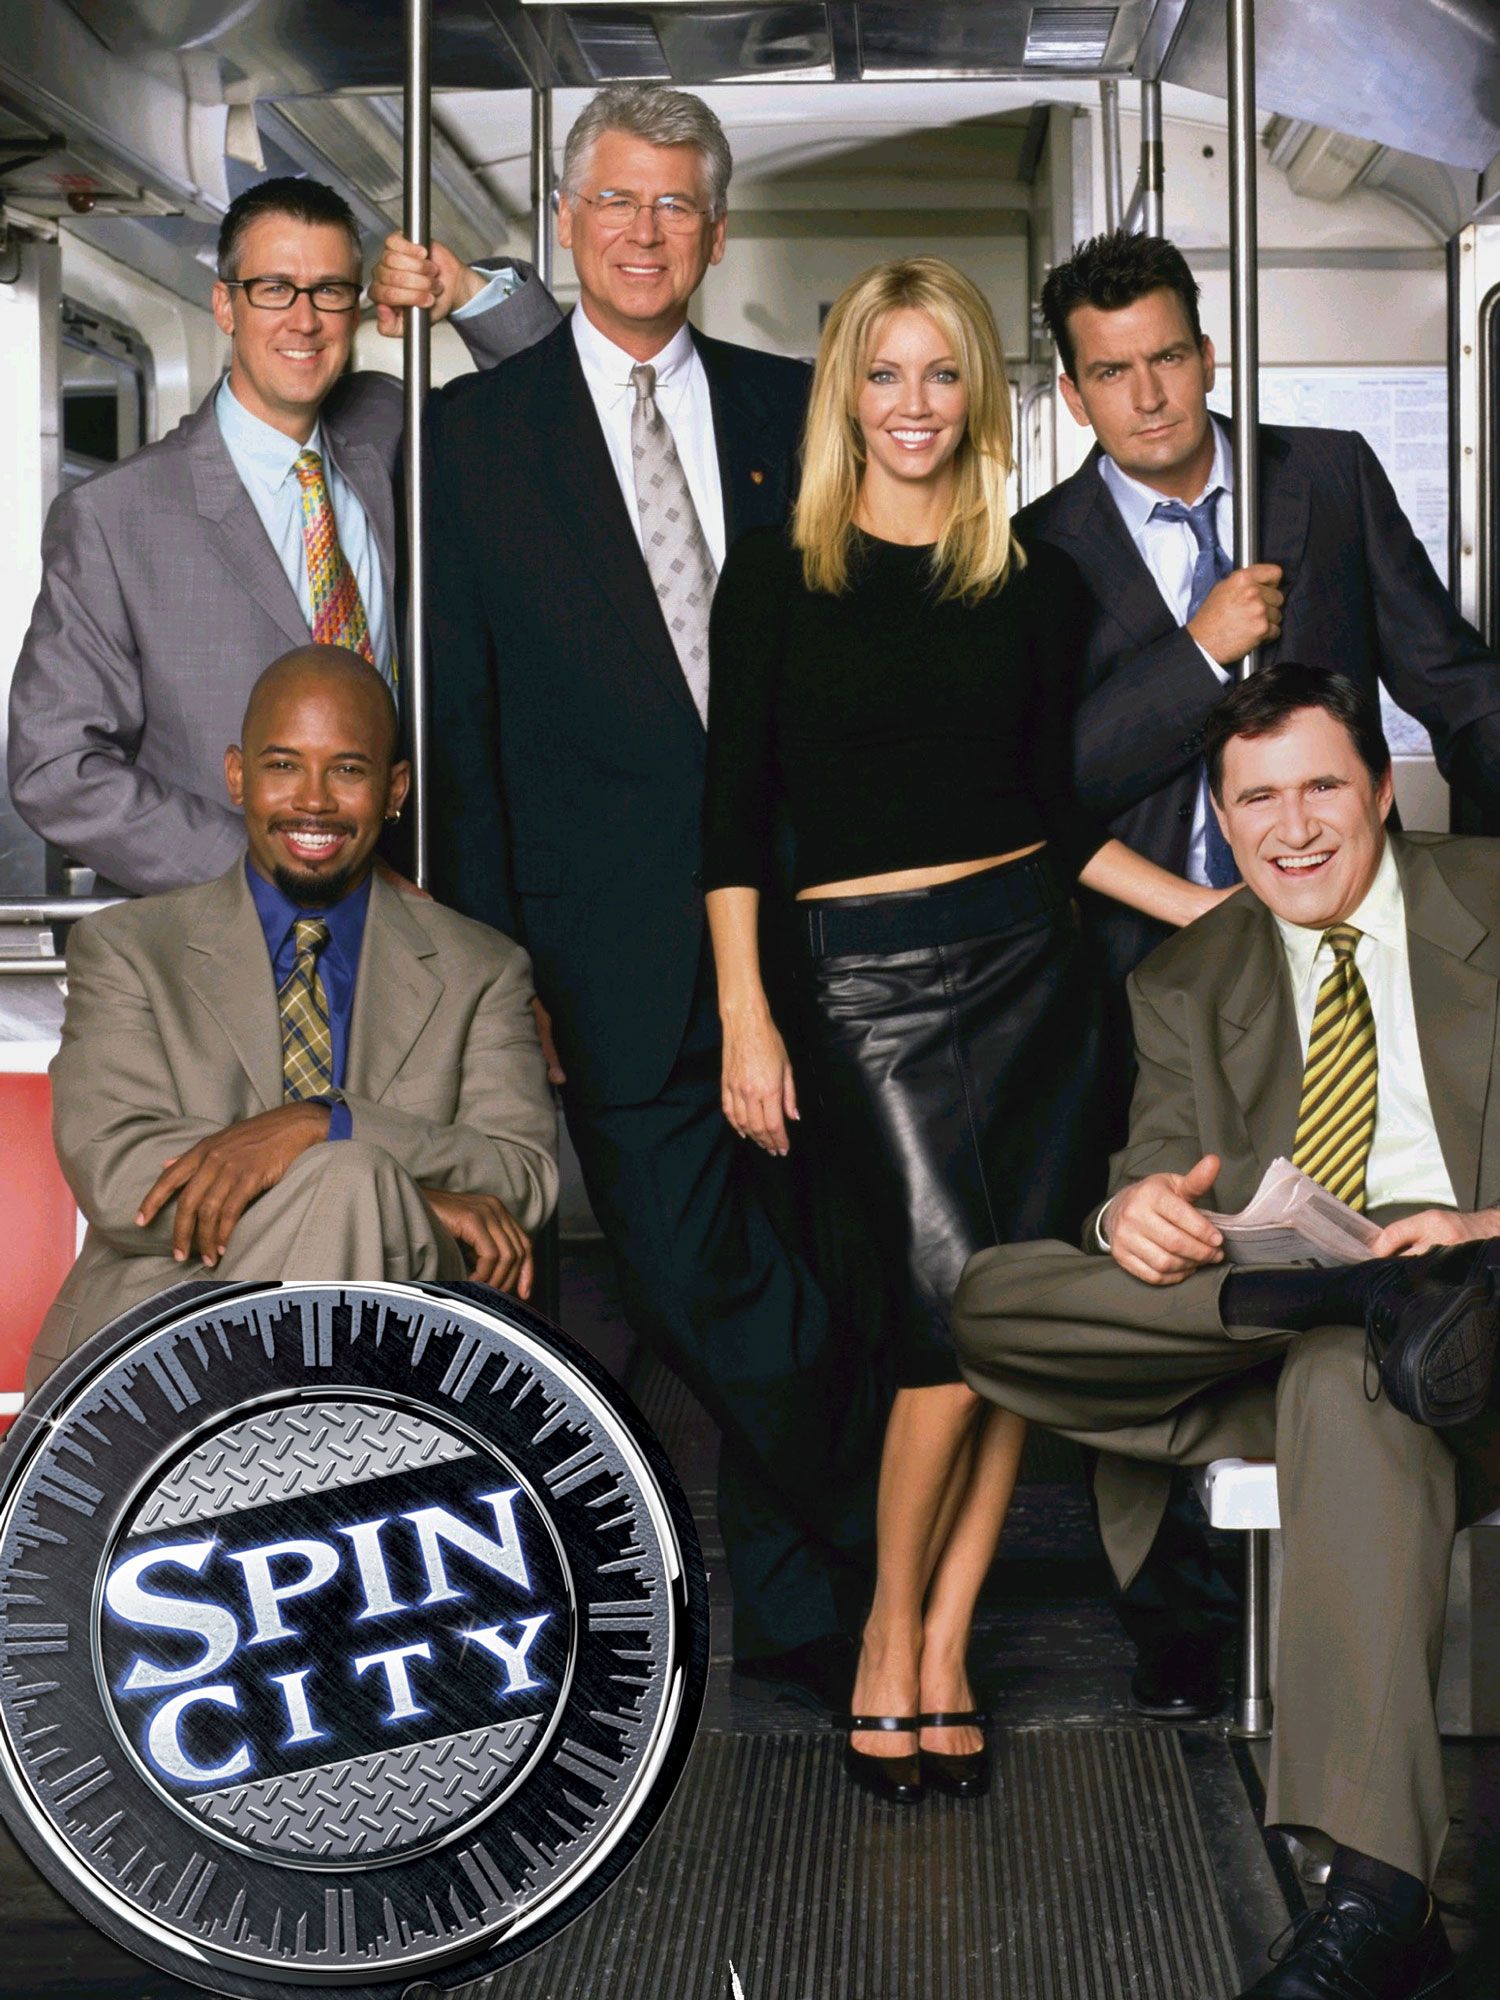 Spin city spin city 700 top